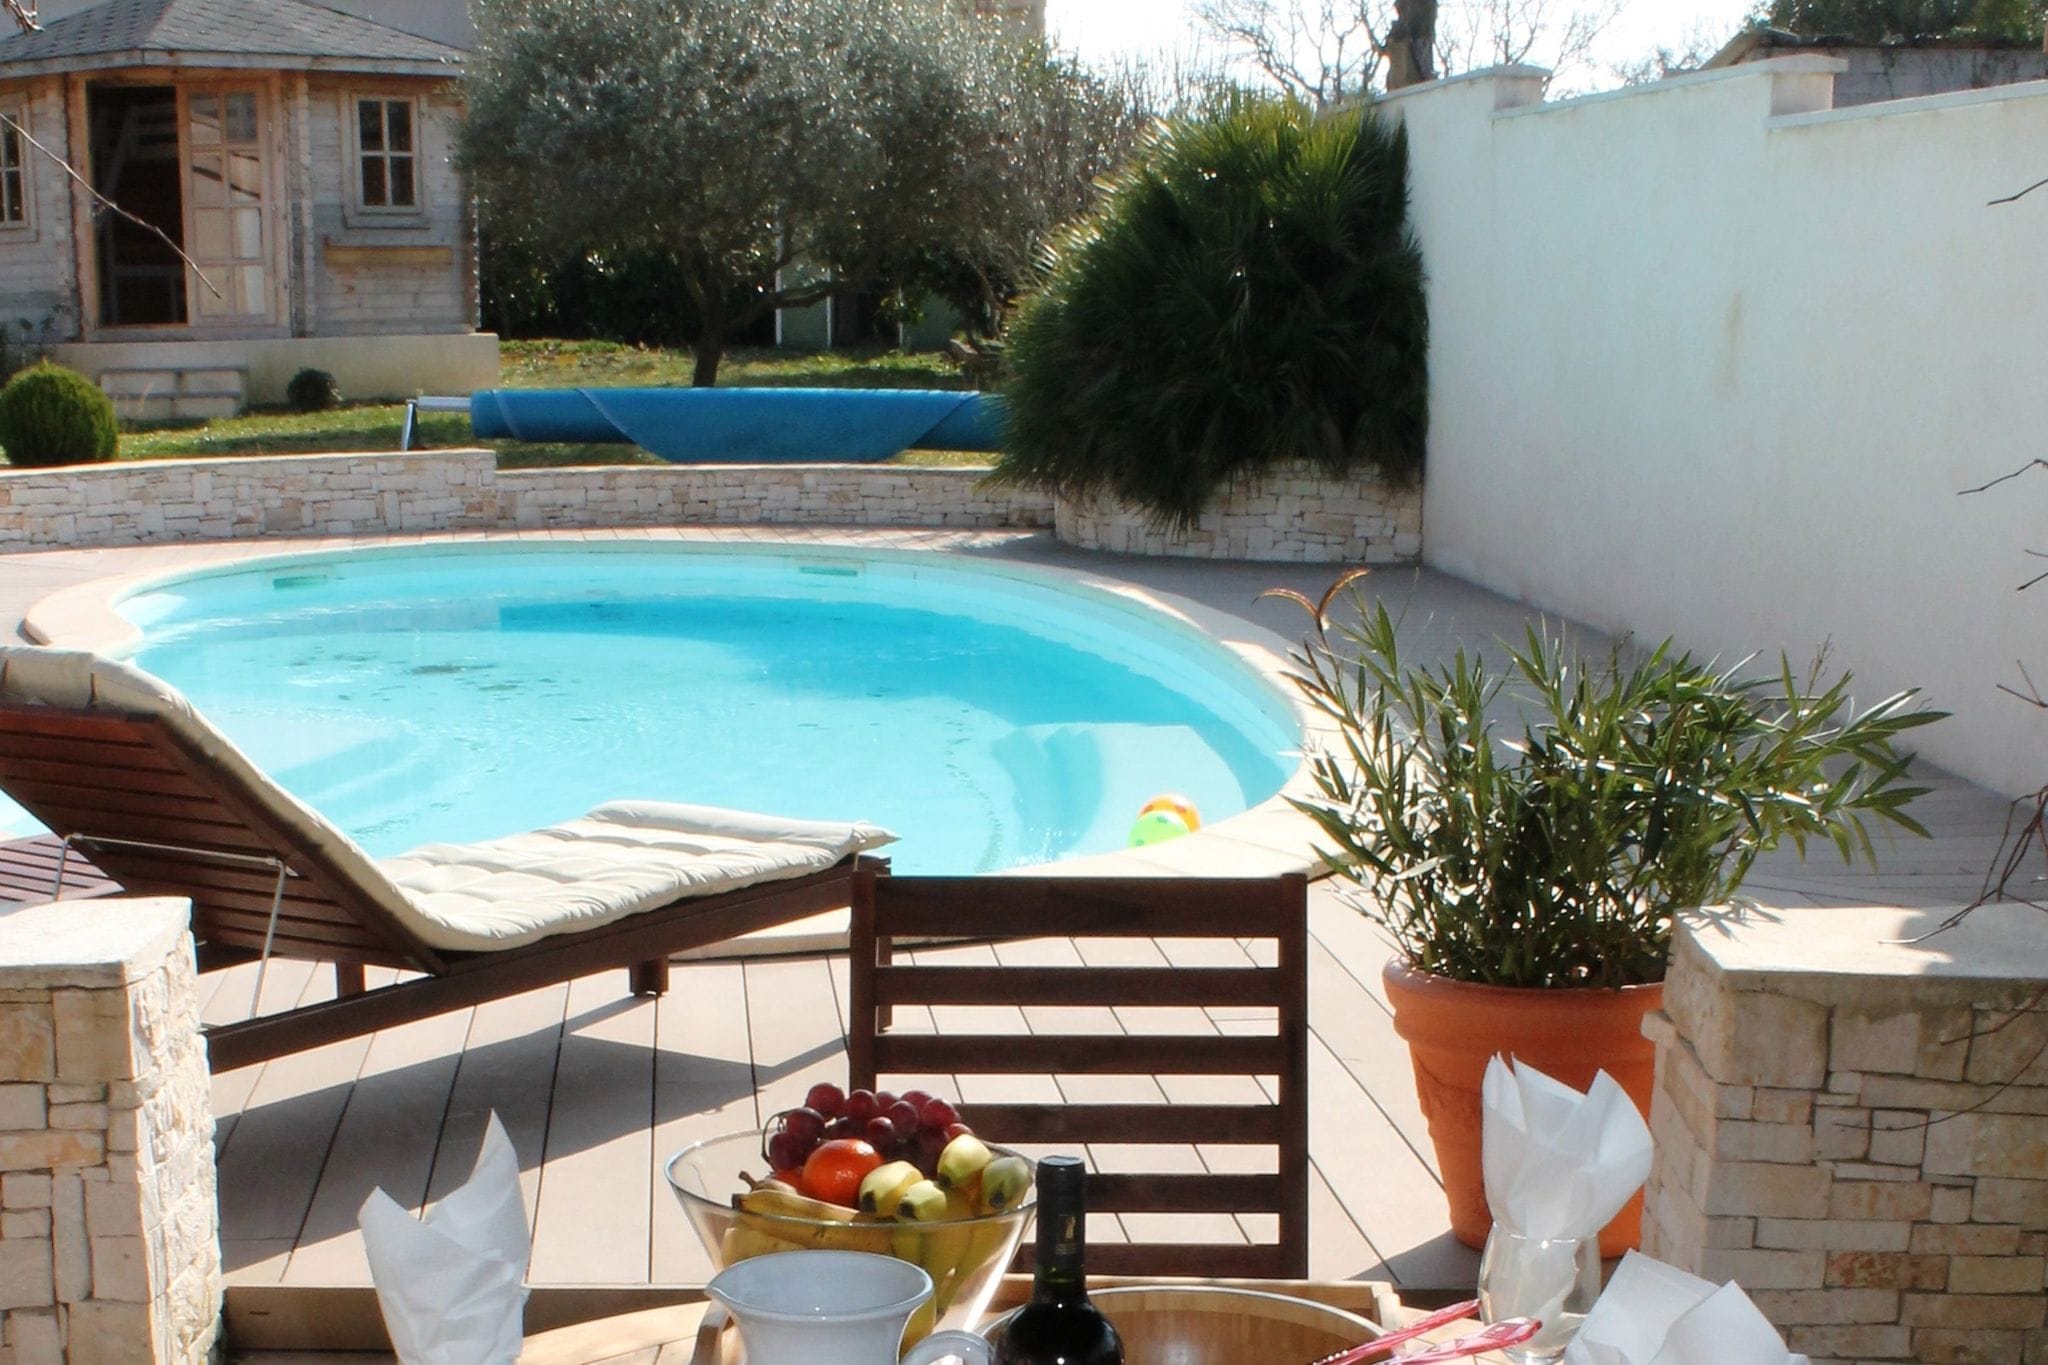 Beautiful modern villa with spacious pool within walking distance of the village